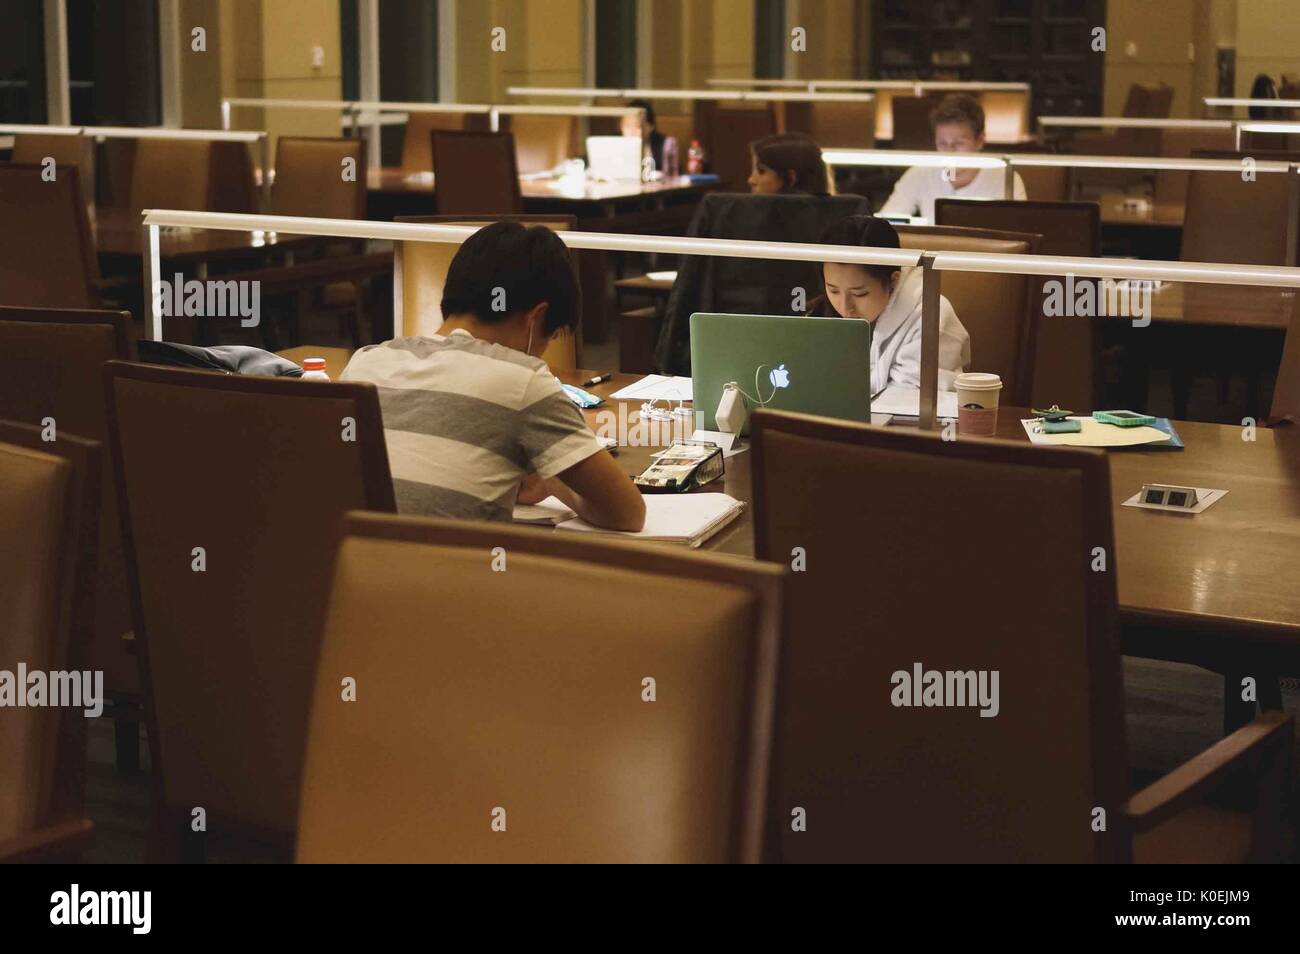 College students seated at study tables work from notebooks and laptops during the late hours of the night, the only light in the dim room coming from lamps on the tables, Albert Hutzler Reading Room, Brody Learning Commons, Johns Hopkins University, Baltimore, Maryland, March, 2014. Courtesy Eric Chen. Stock Photo